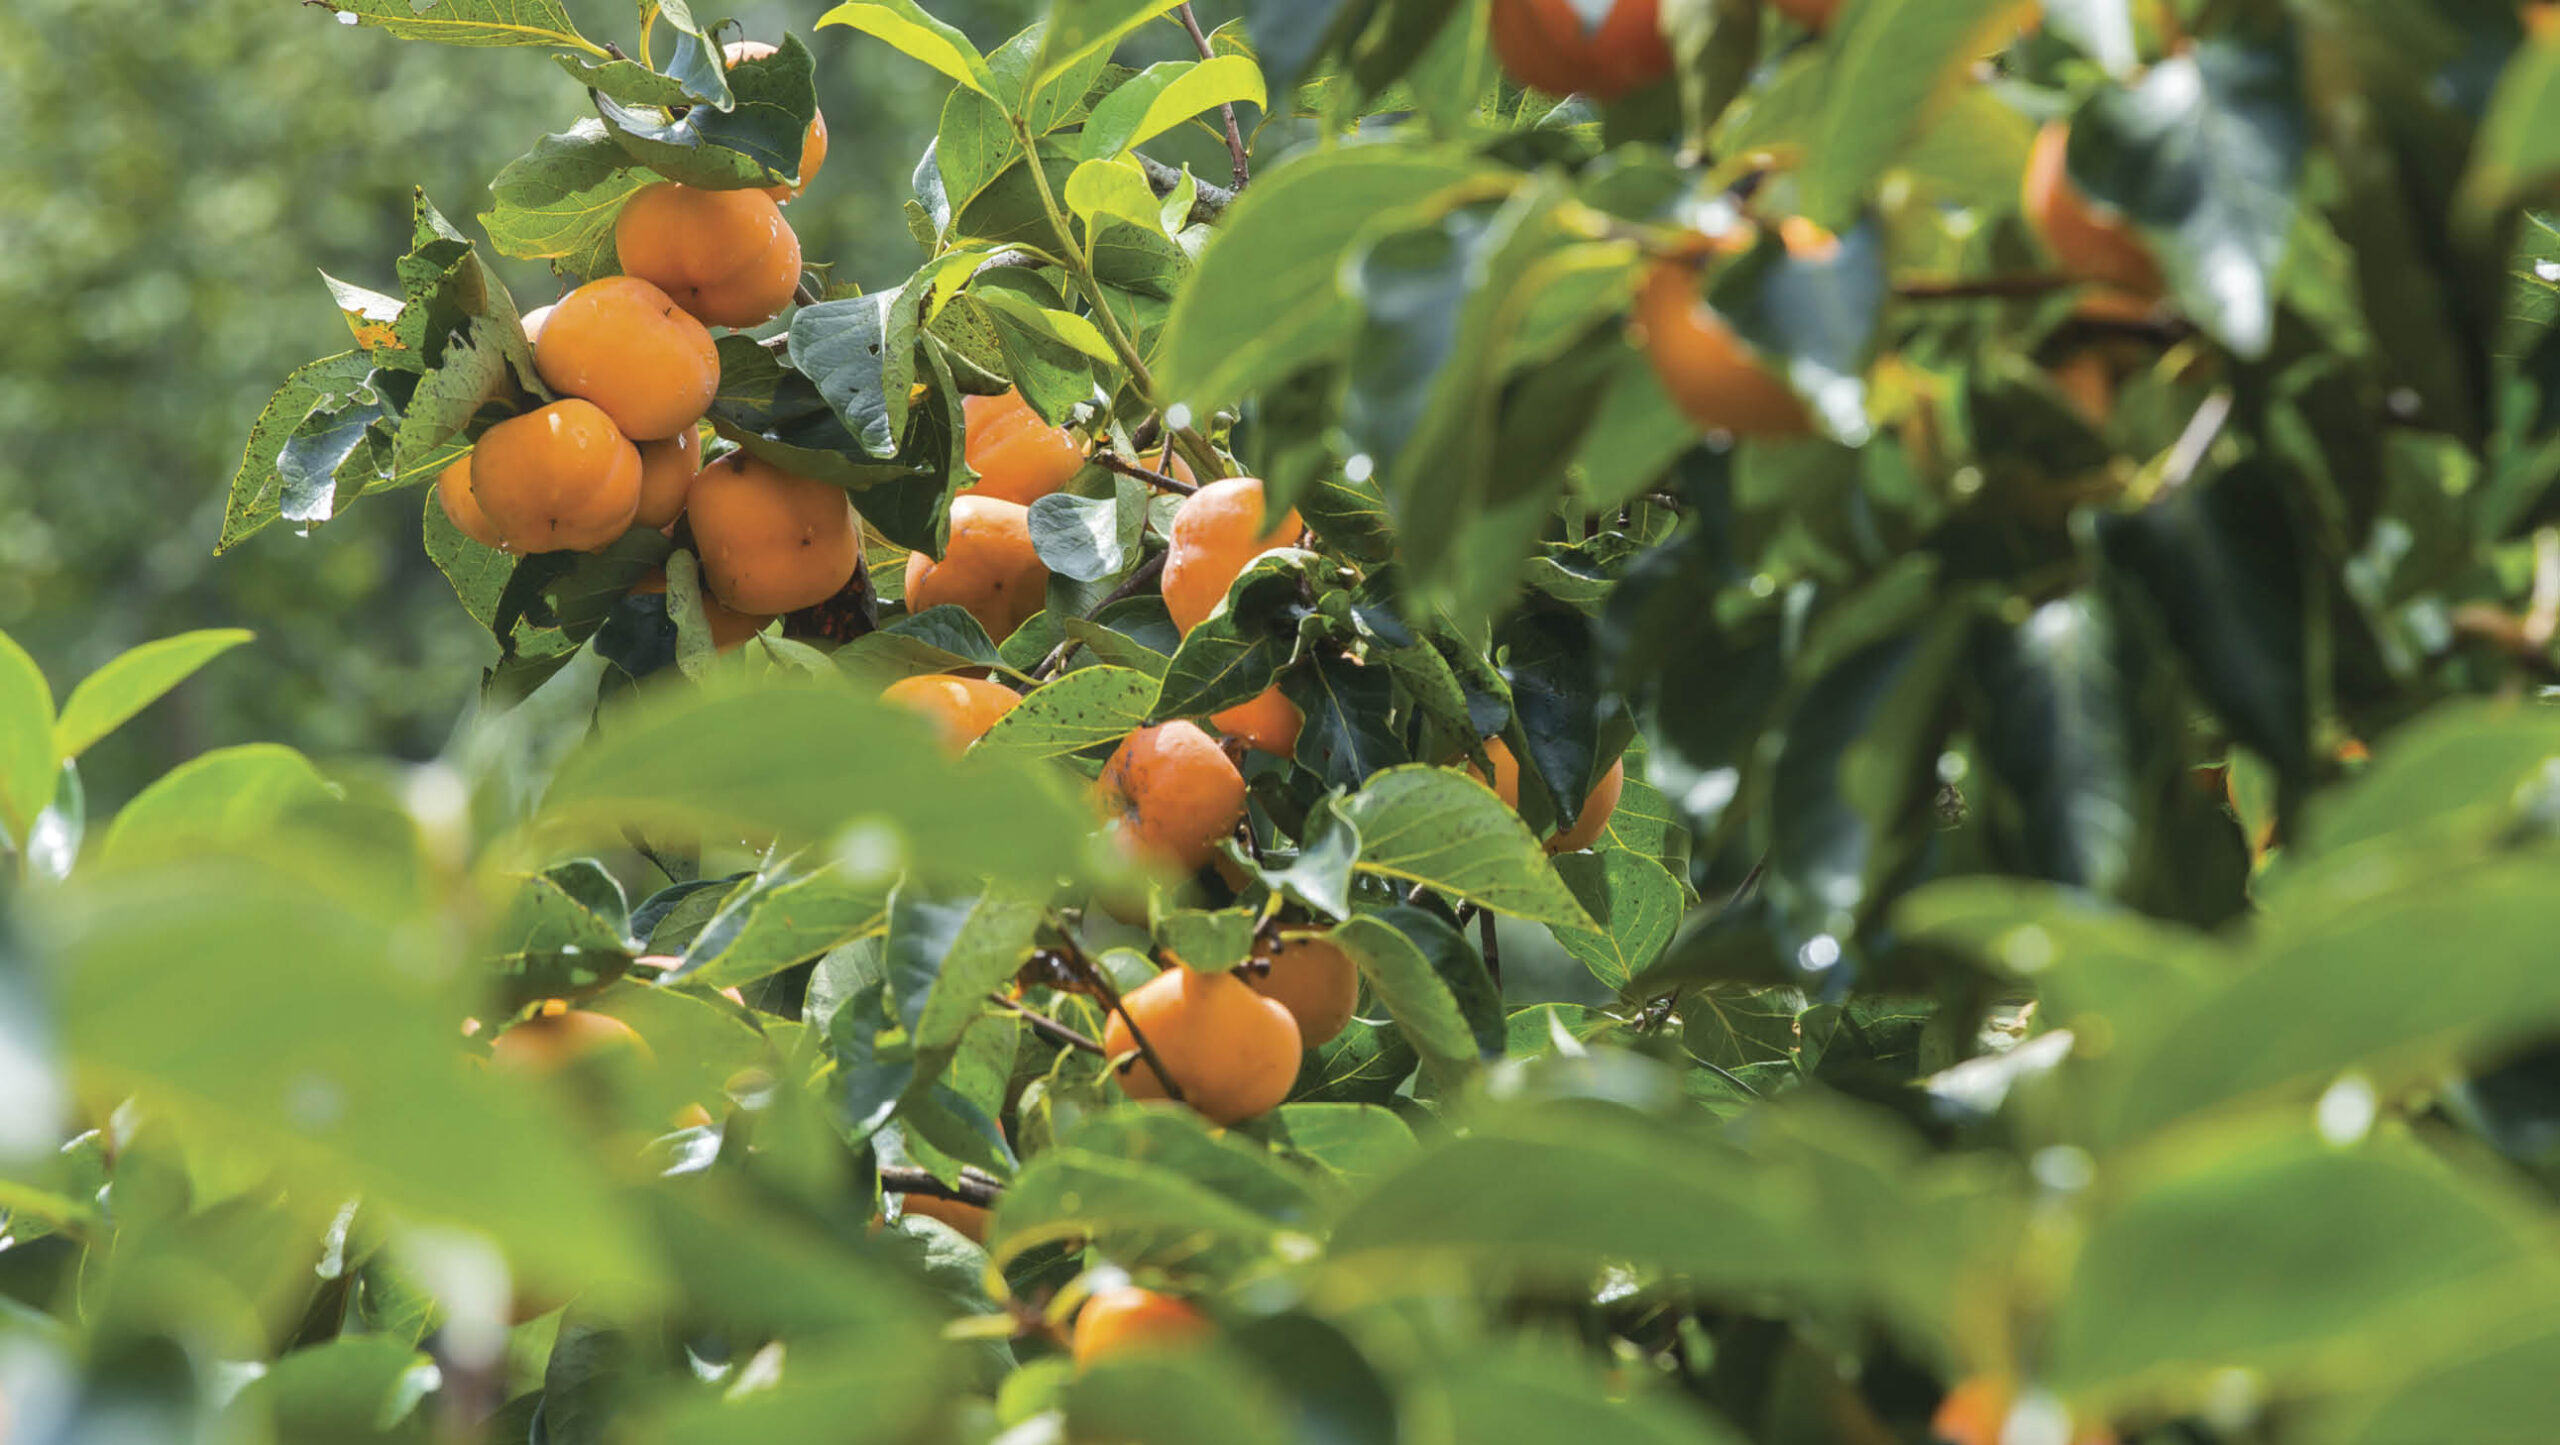 Persimmons are a great tree to grow and provide a bounty of fruit in autumn.